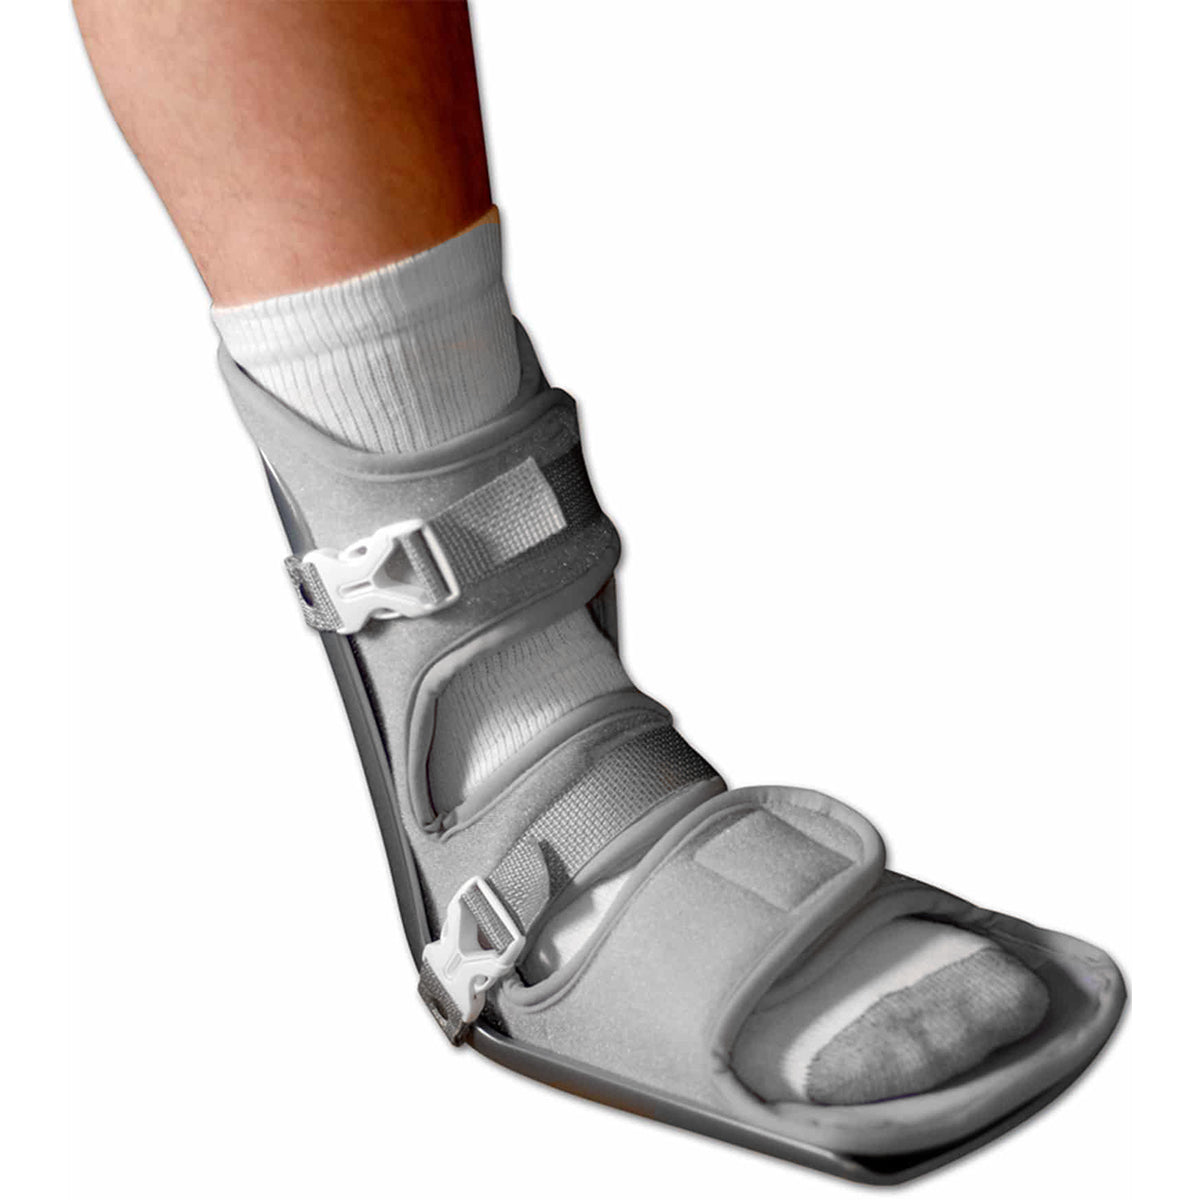 Nice Stretch 90 Fixed Angle Night Splint for Plantar Fasciitis w/ Cold Therapy Nice Stretch